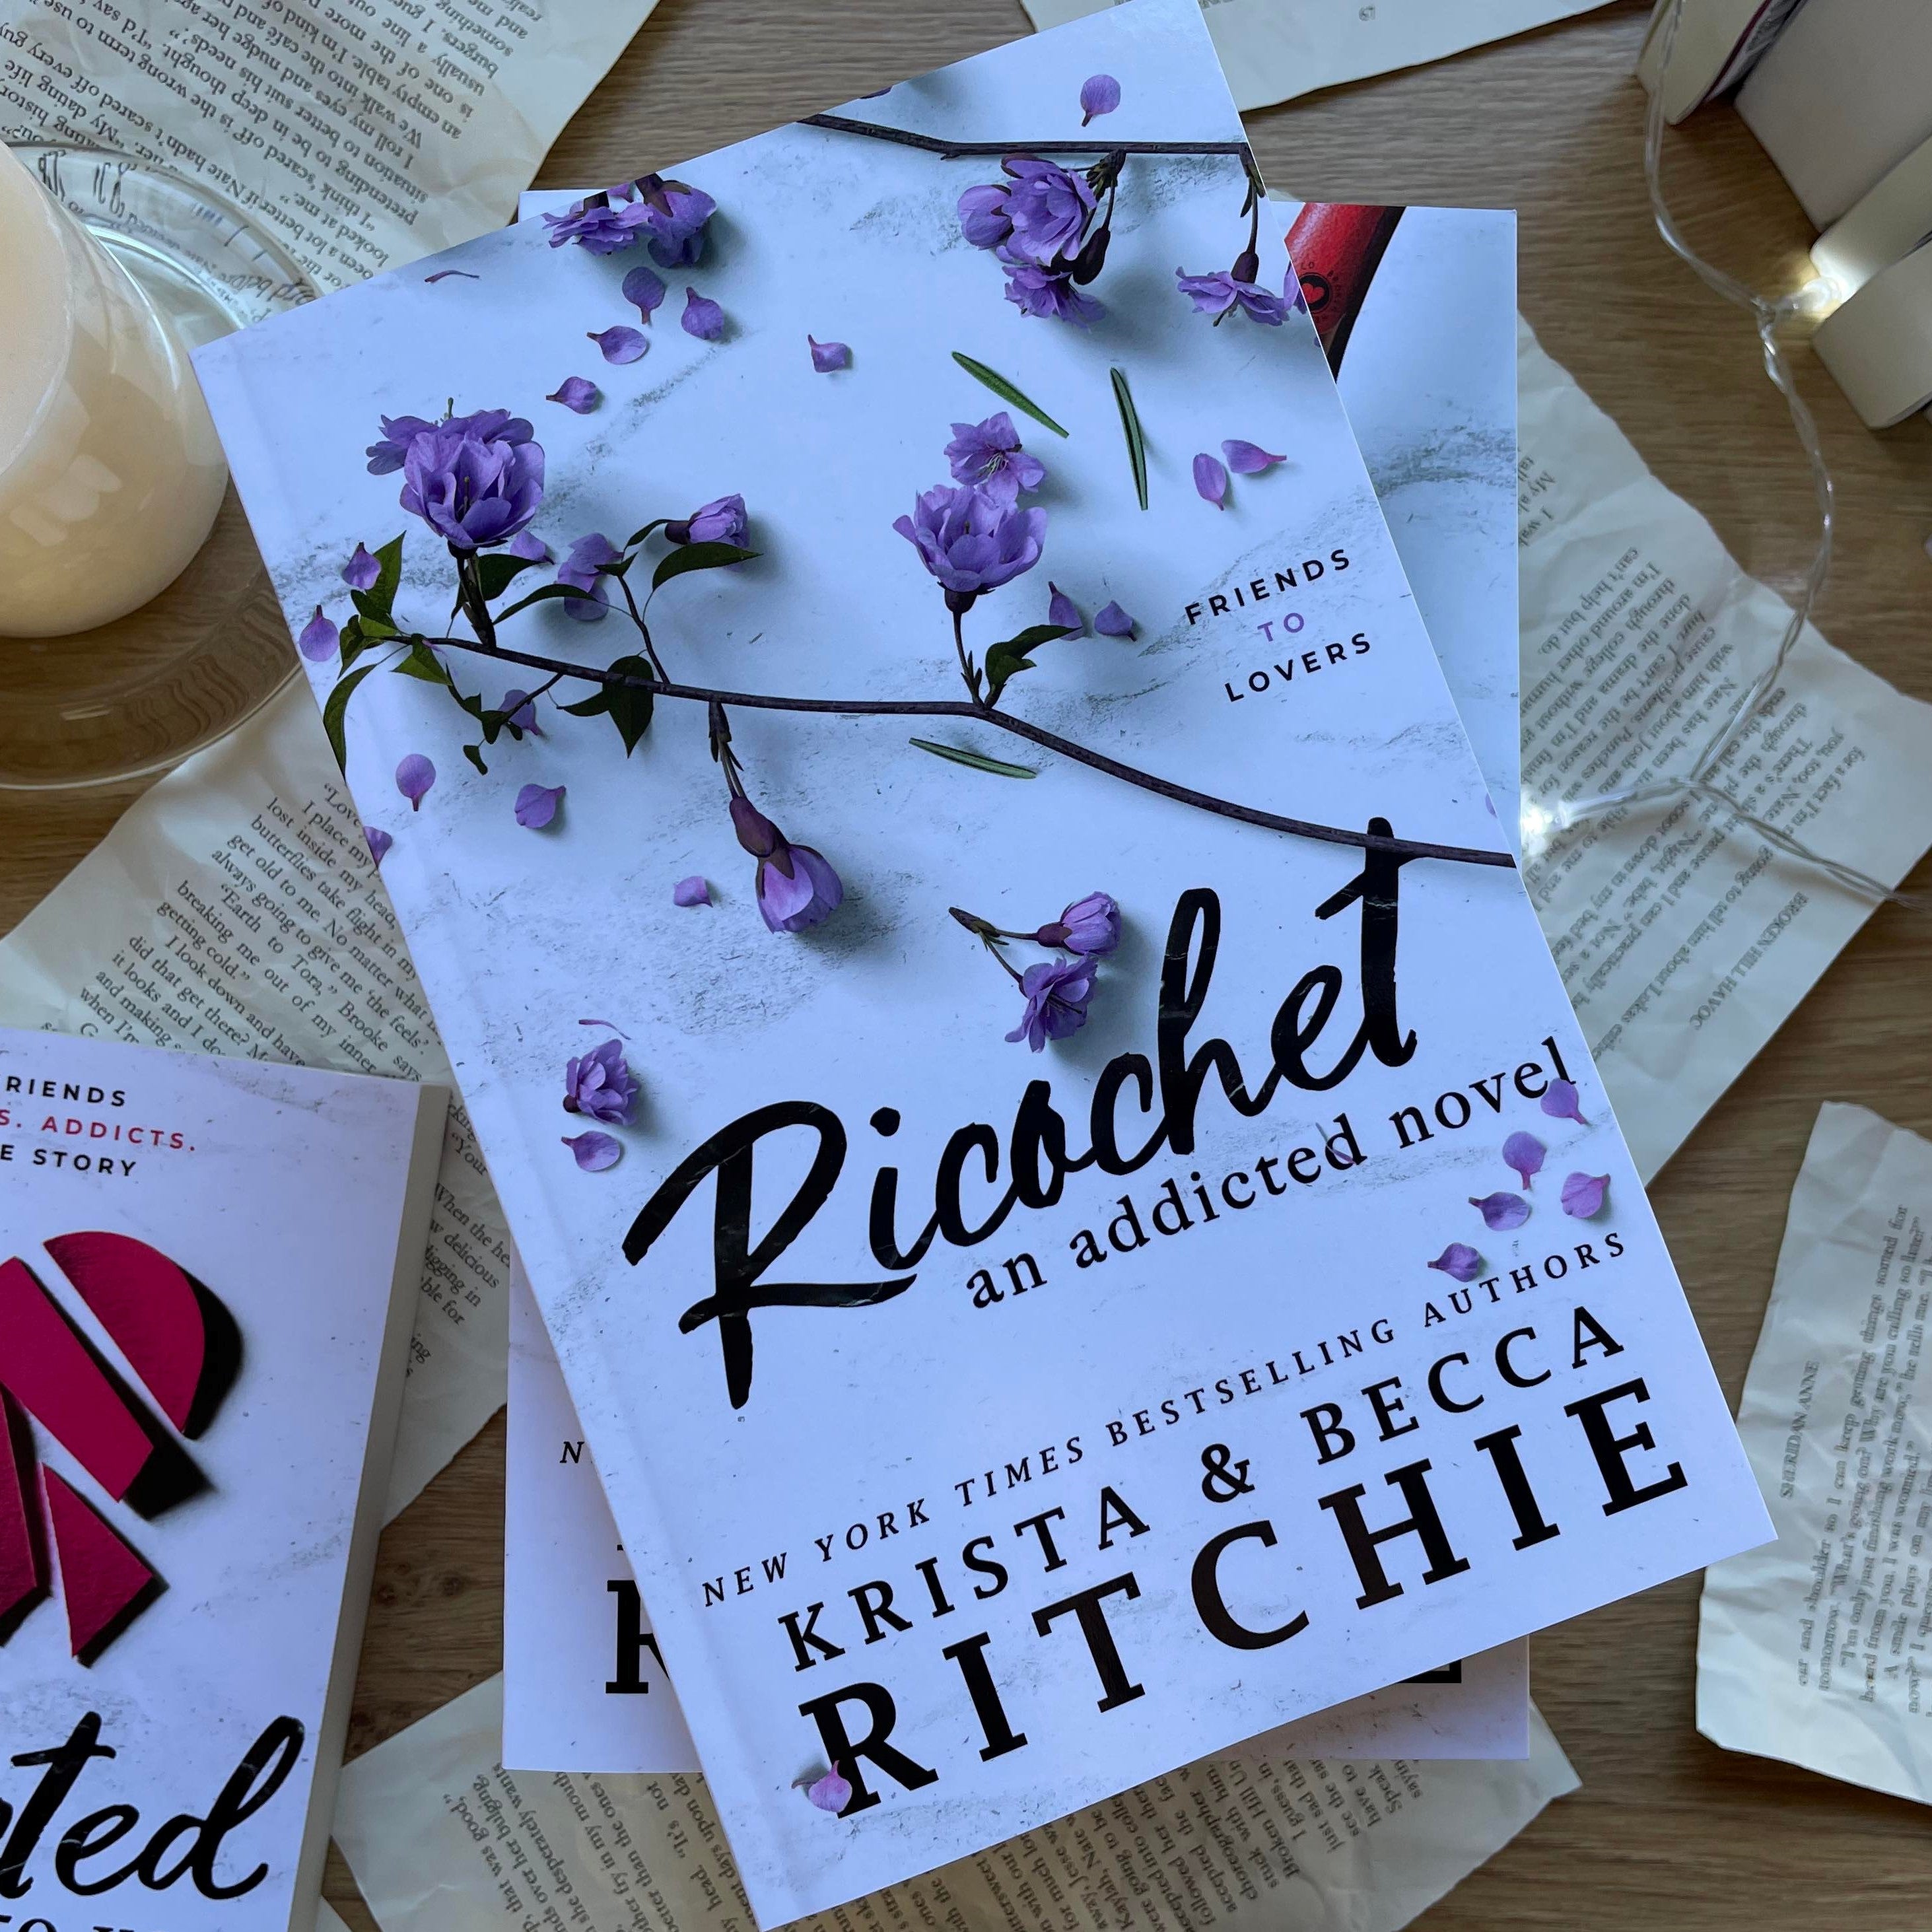 Addicted series by Krista & Becca Ritchie